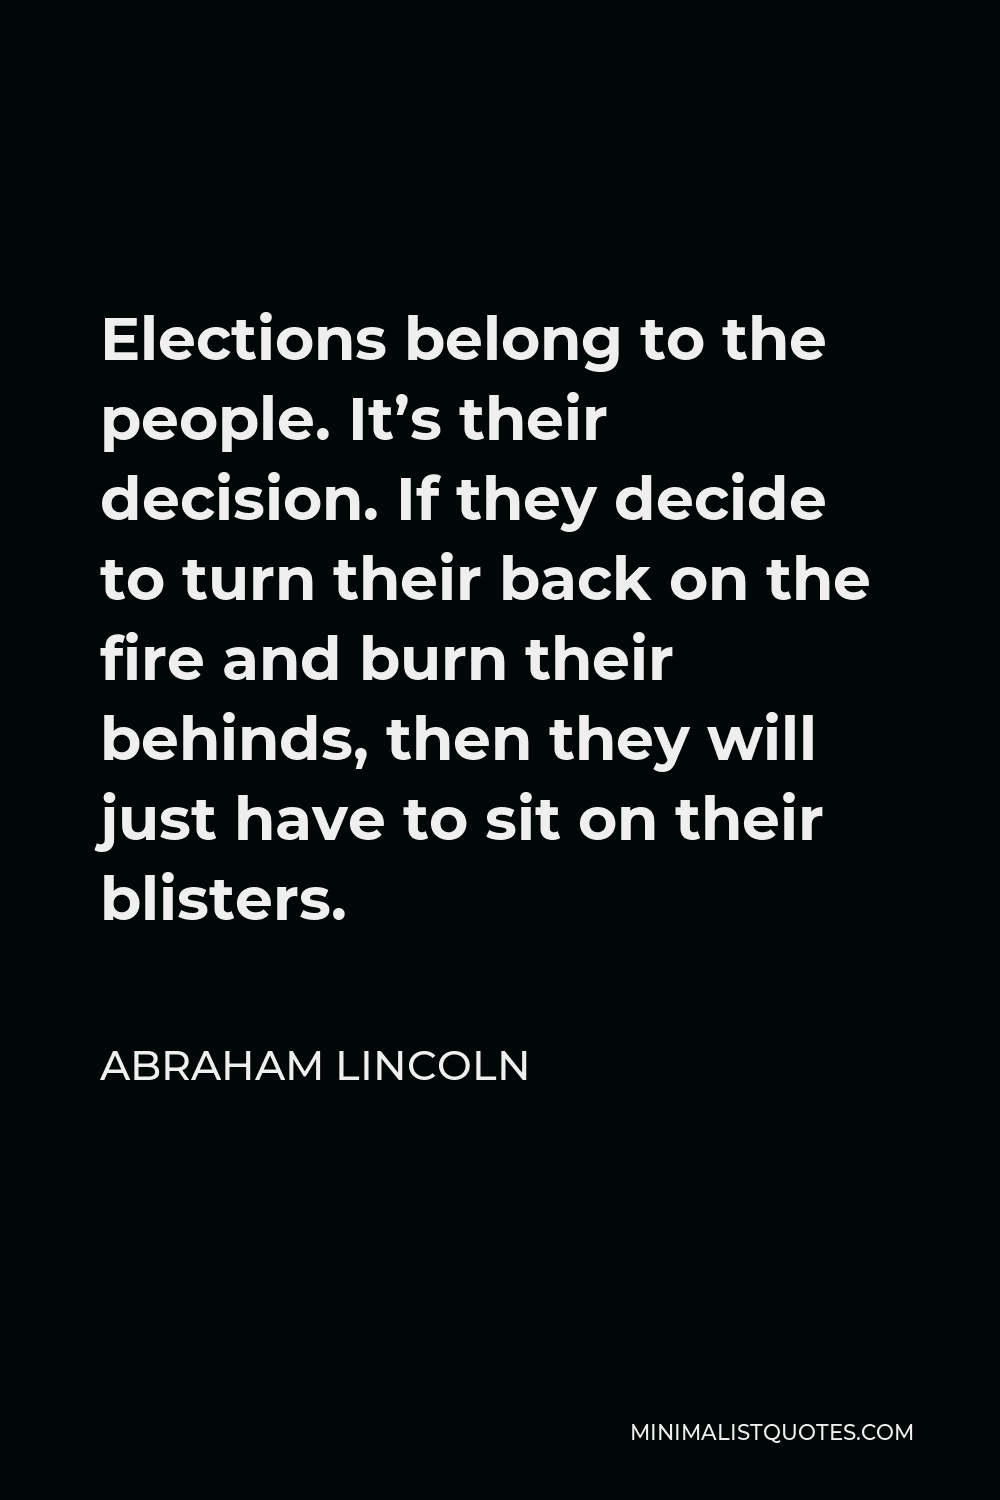 Abraham Lincoln Quote - Elections belong to the people. It’s their decision. If they decide to turn their back on the fire and burn their behinds, then they will just have to sit on their blisters.